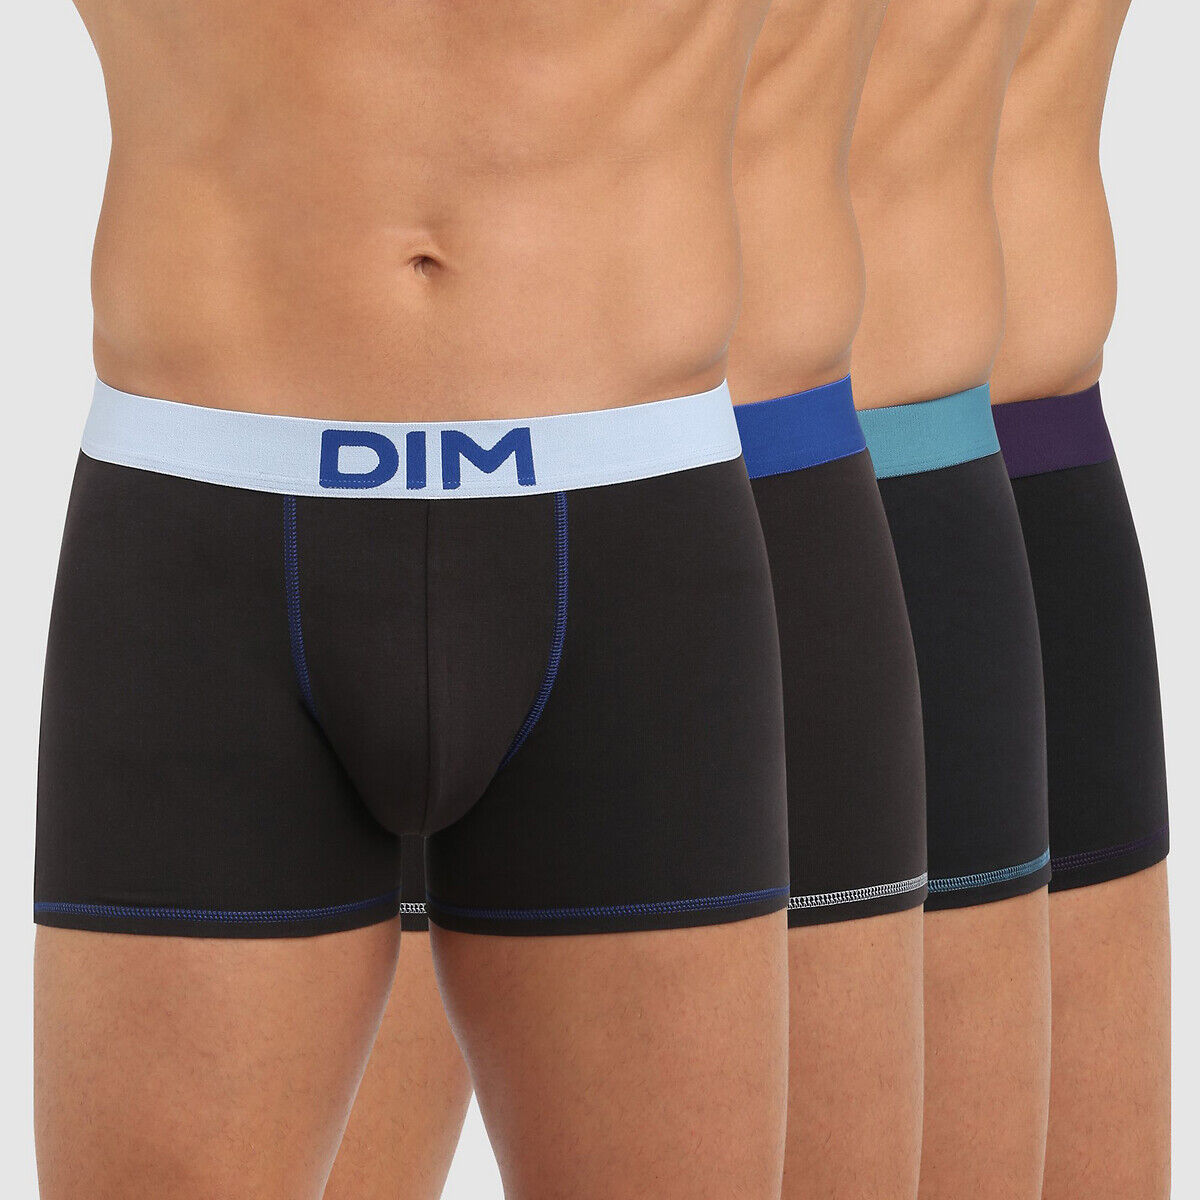 DIM 4er-Pack Boxer-Shorts Mix and colors MEHRFARBIG;SCHWARZ